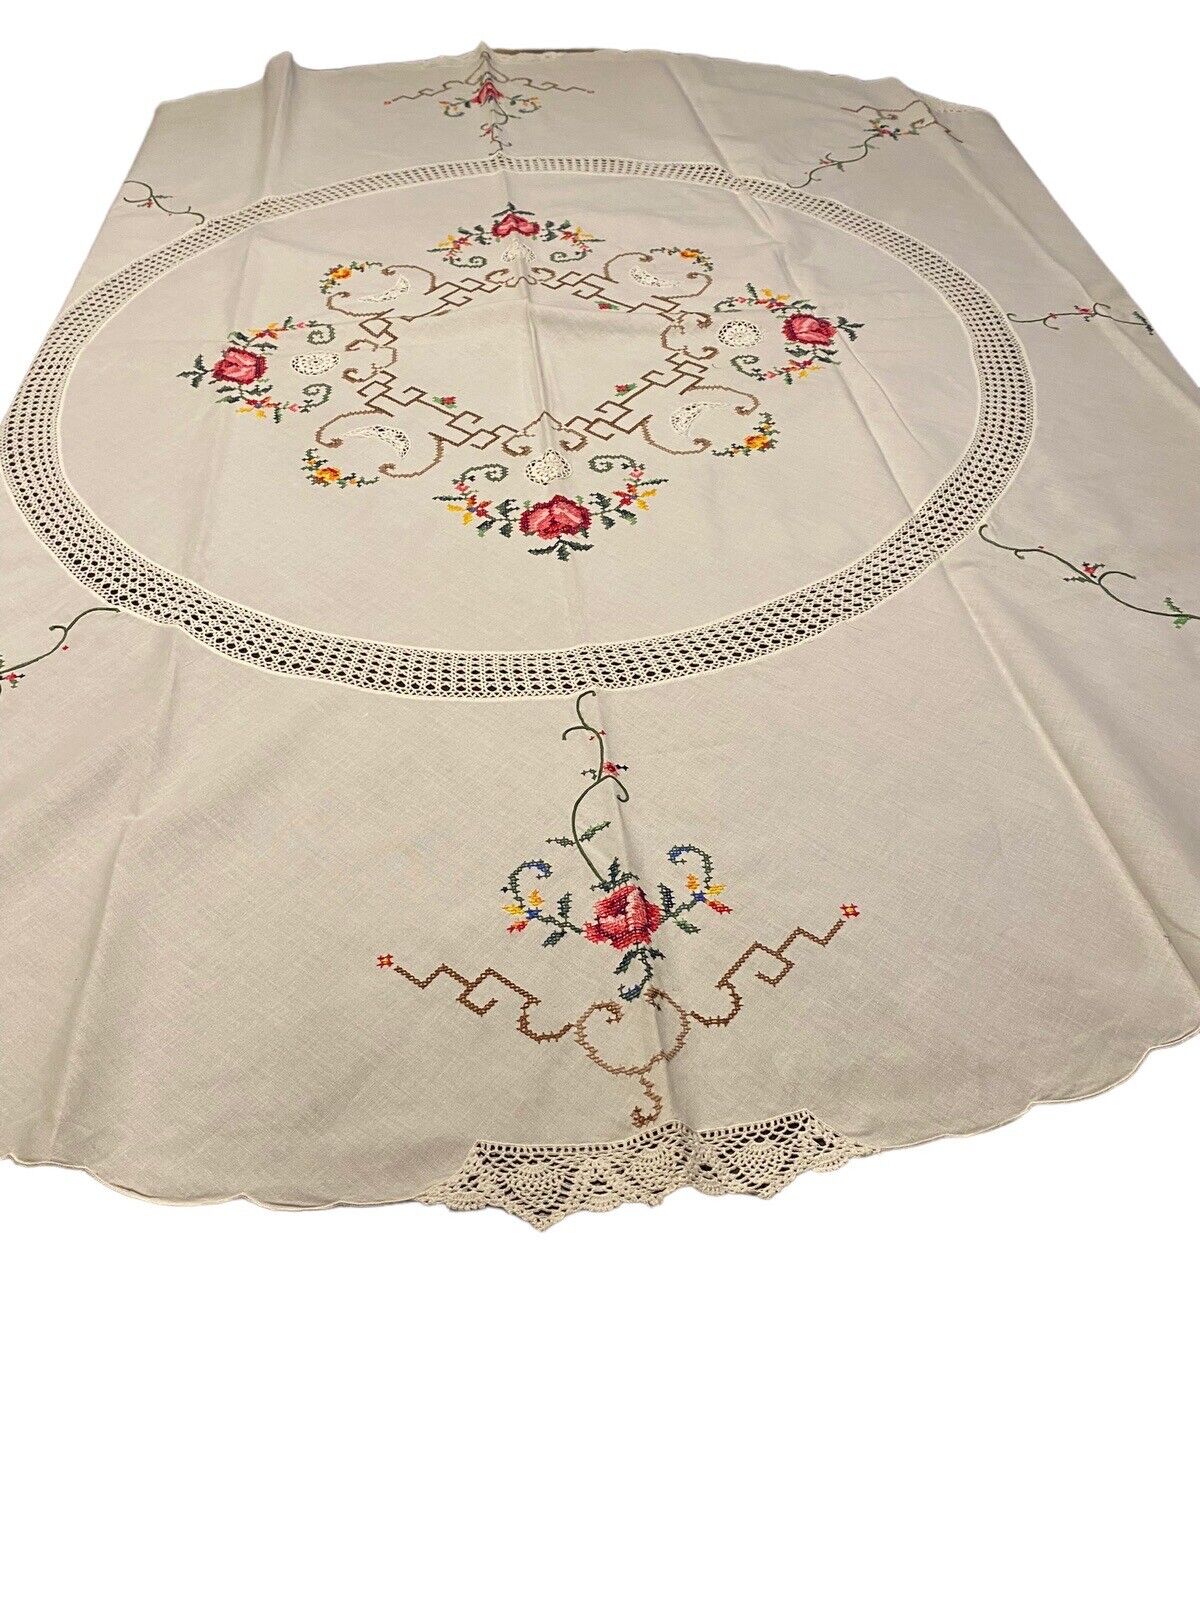 Vintage Needlepoint Round Floral Tablecloth Scallop Edges Lace 62” Stunning